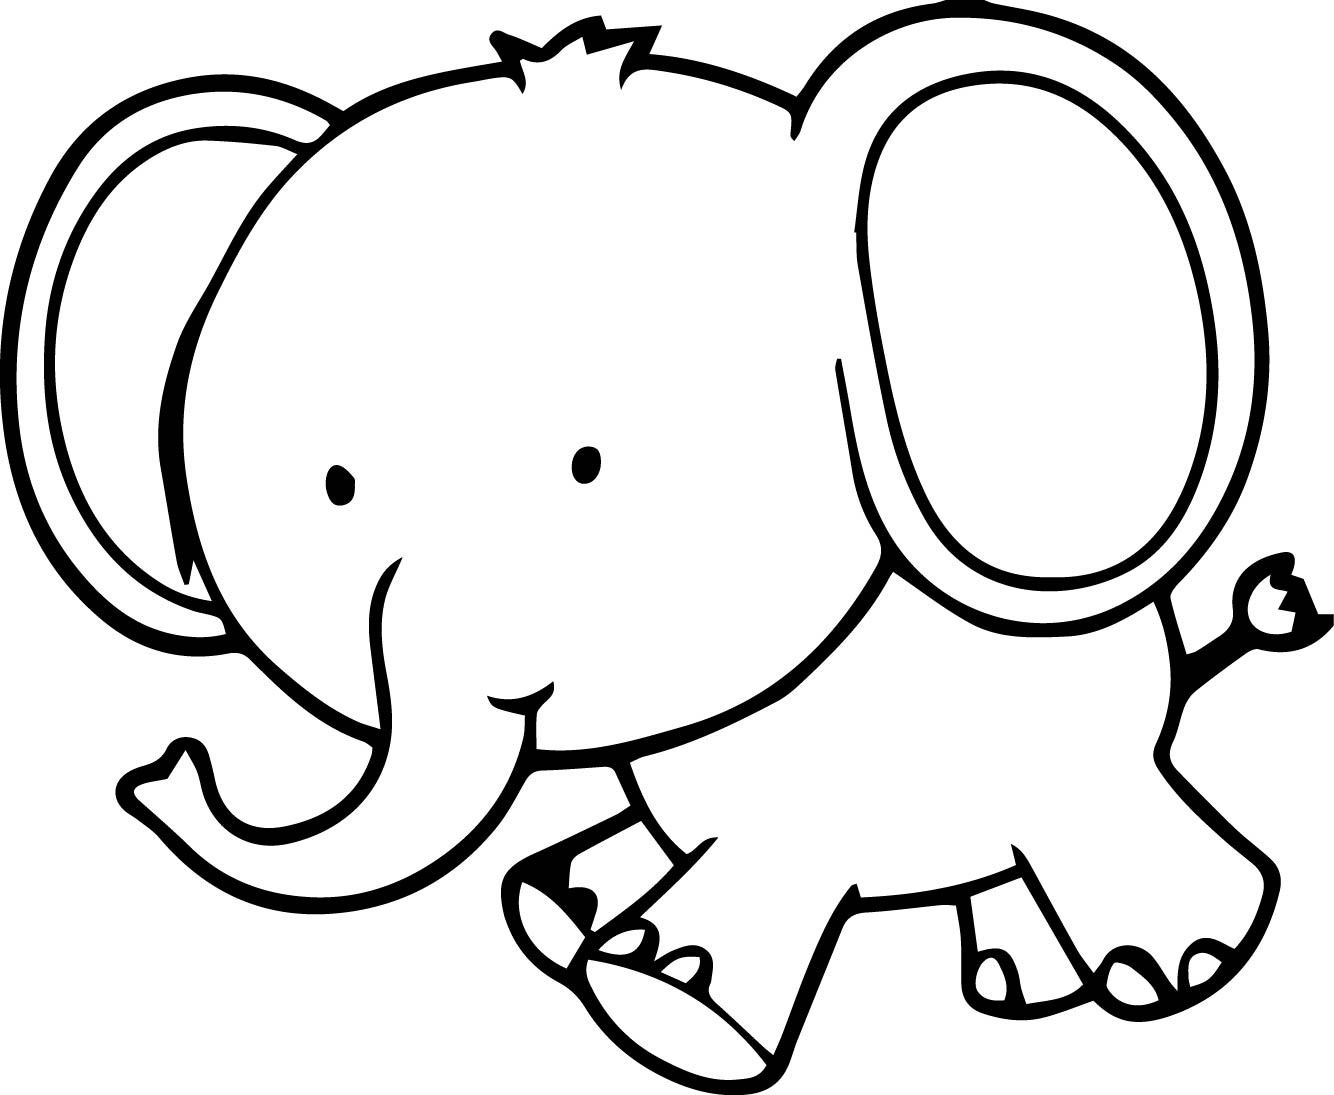 the-21-best-ideas-for-cute-baby-elephant-coloring-pages-home-family